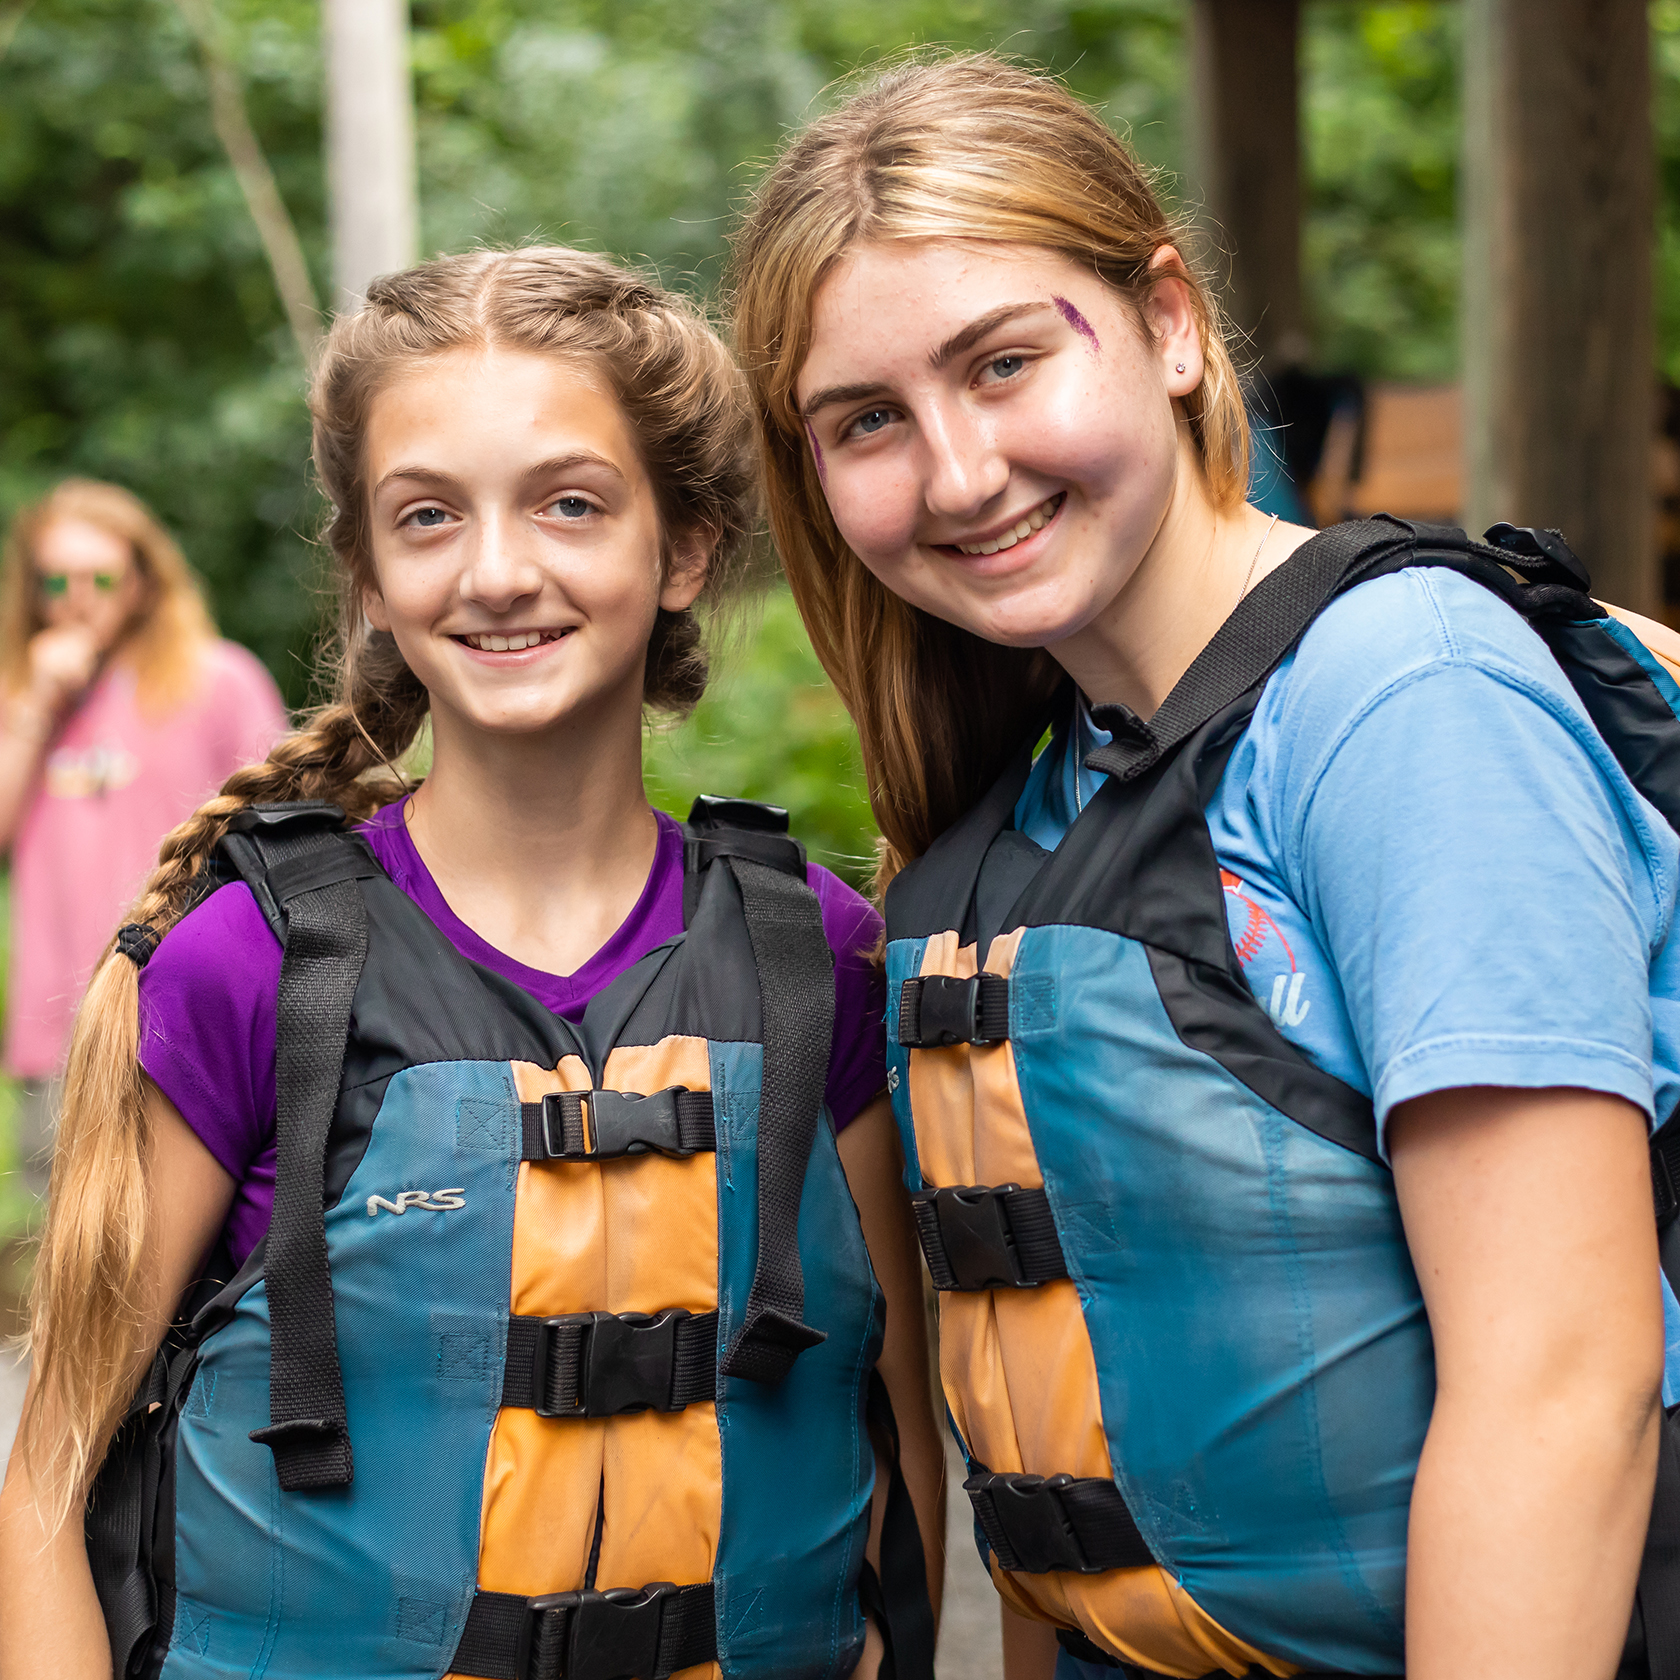 2 girl campers smiling